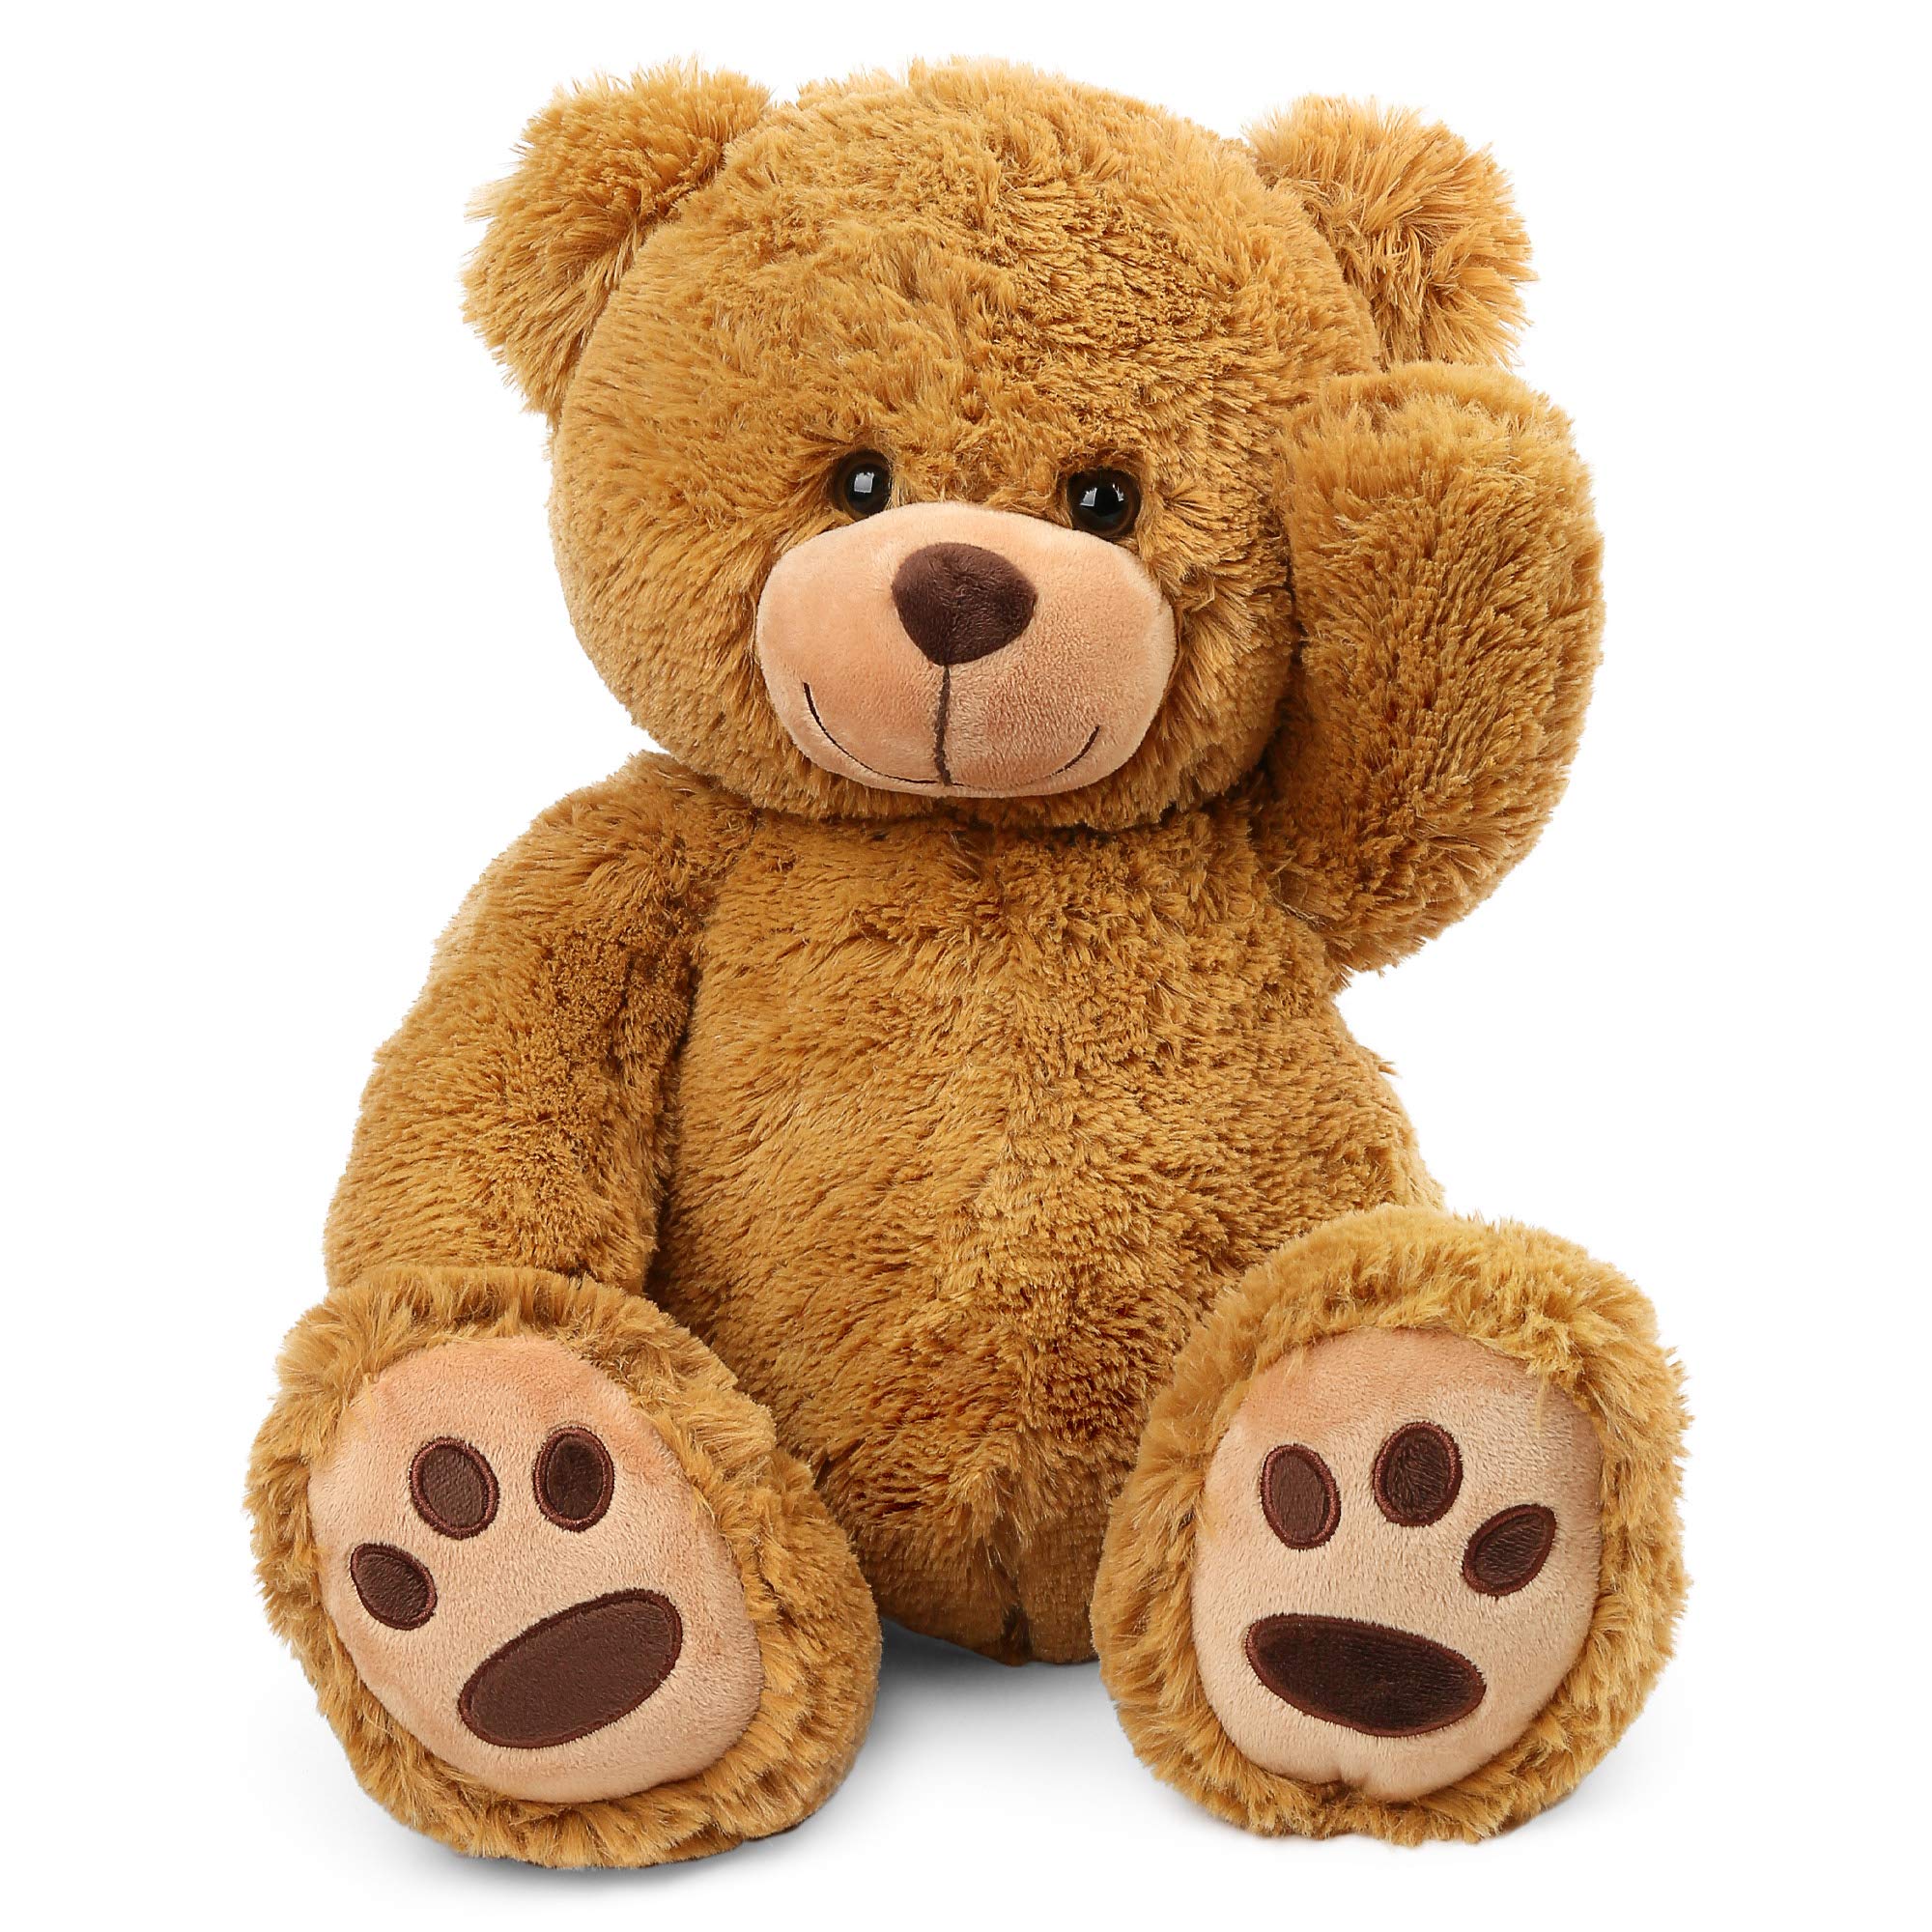 Mua LotFancy Teddy Bear Stuffed Animals, 20 inch Soft Cuddly Stuffed Plush  Bear, Cute Stuffed Animals Toy with Footprints, Gifts for Kids Baby  Toddlers on Baby Shower, Valentine's Day, Tan Color trên